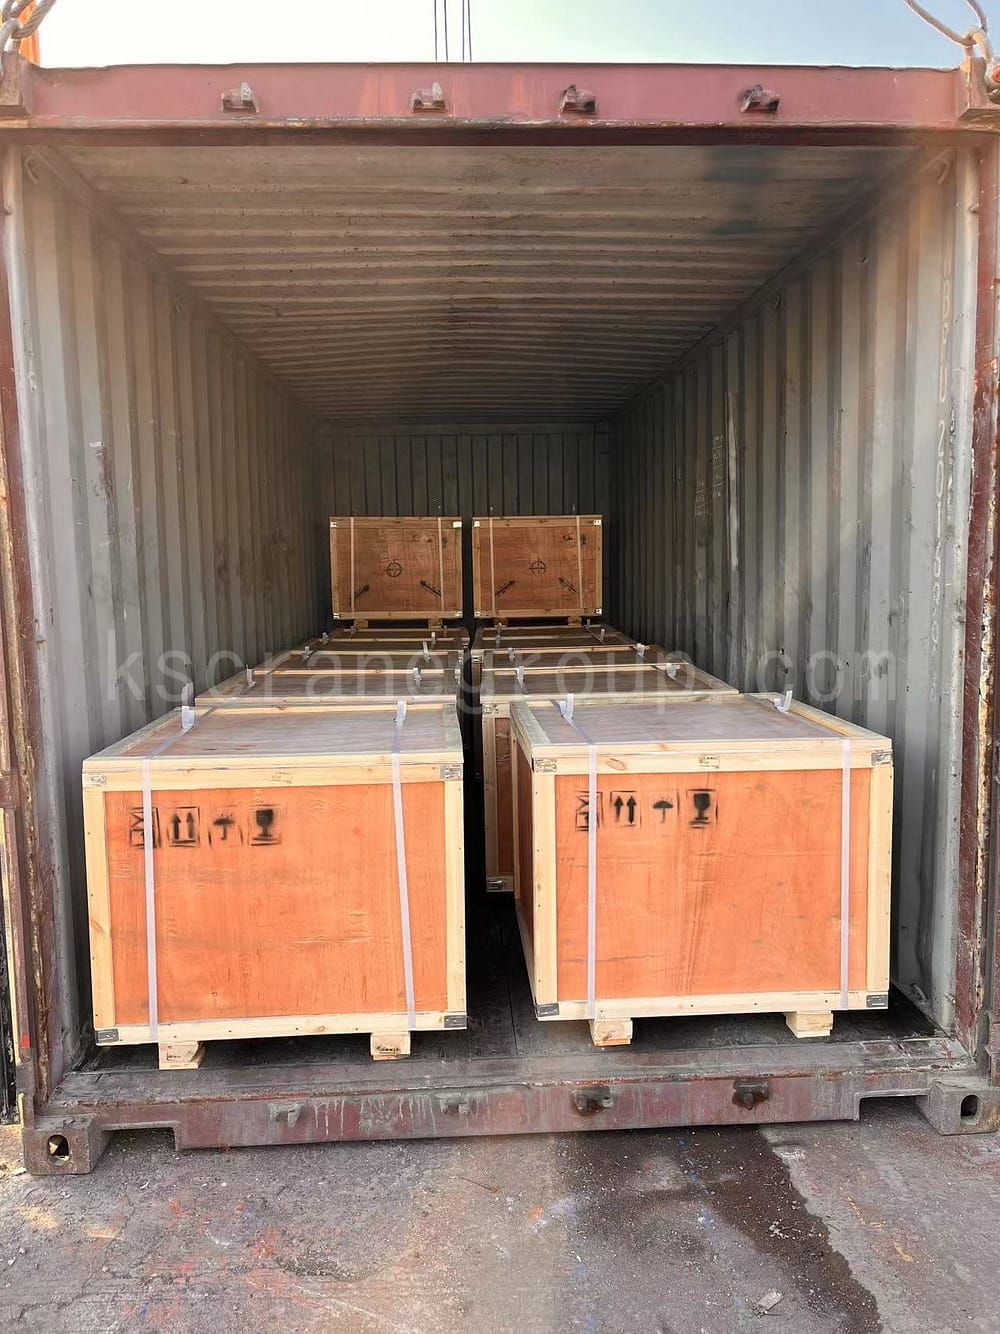 Pcs Casting Wheel Export to EgyptPackage drawing